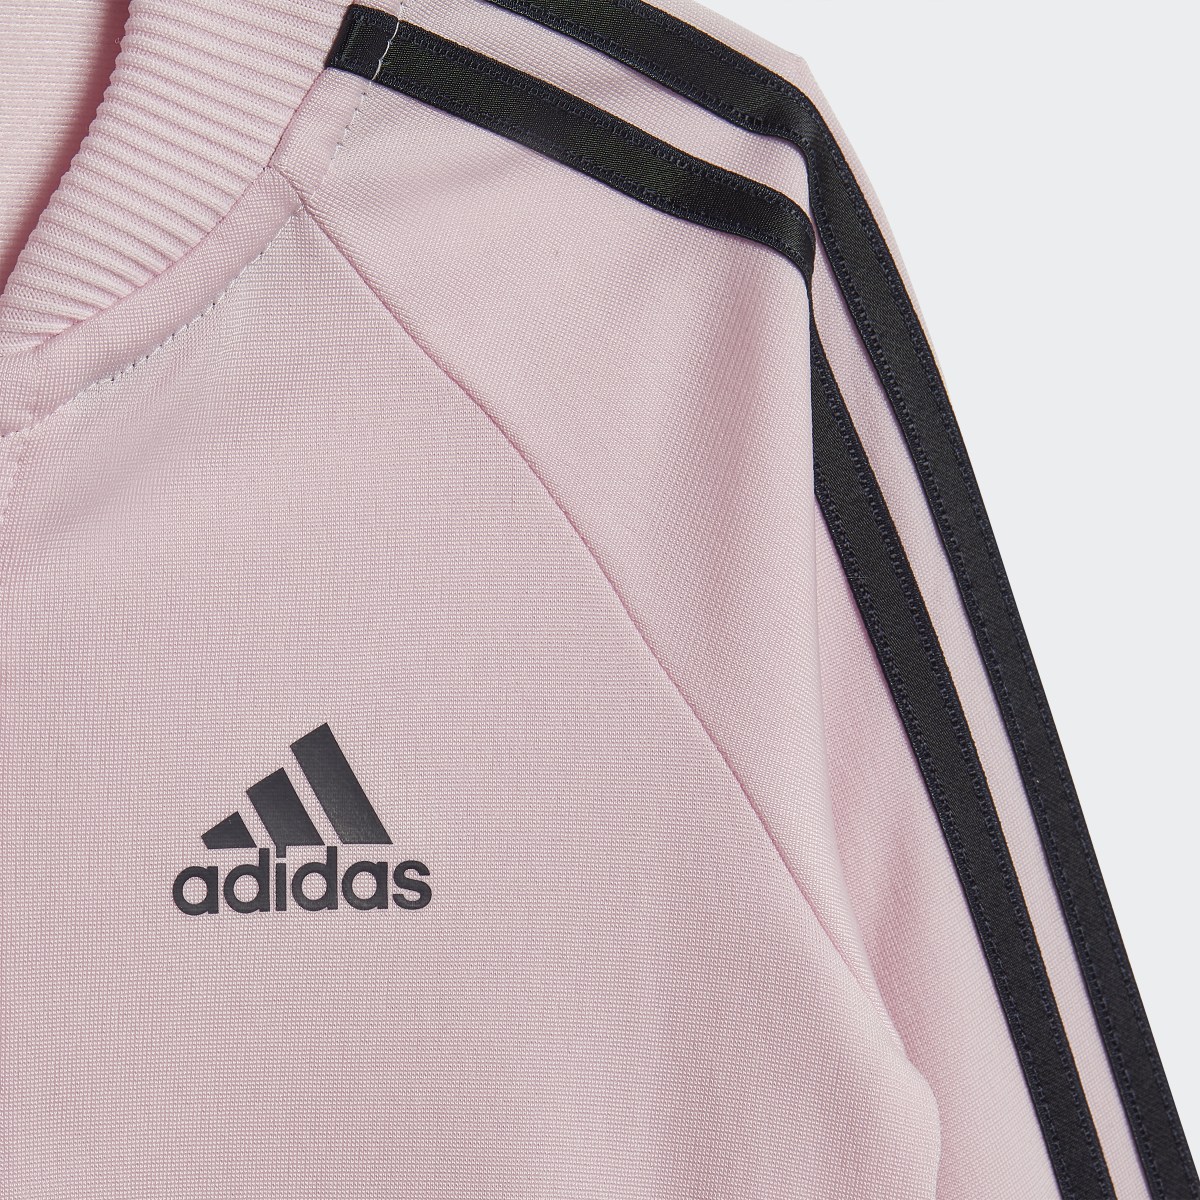 Adidas 3-Stripes Tricot Track Suit. 7